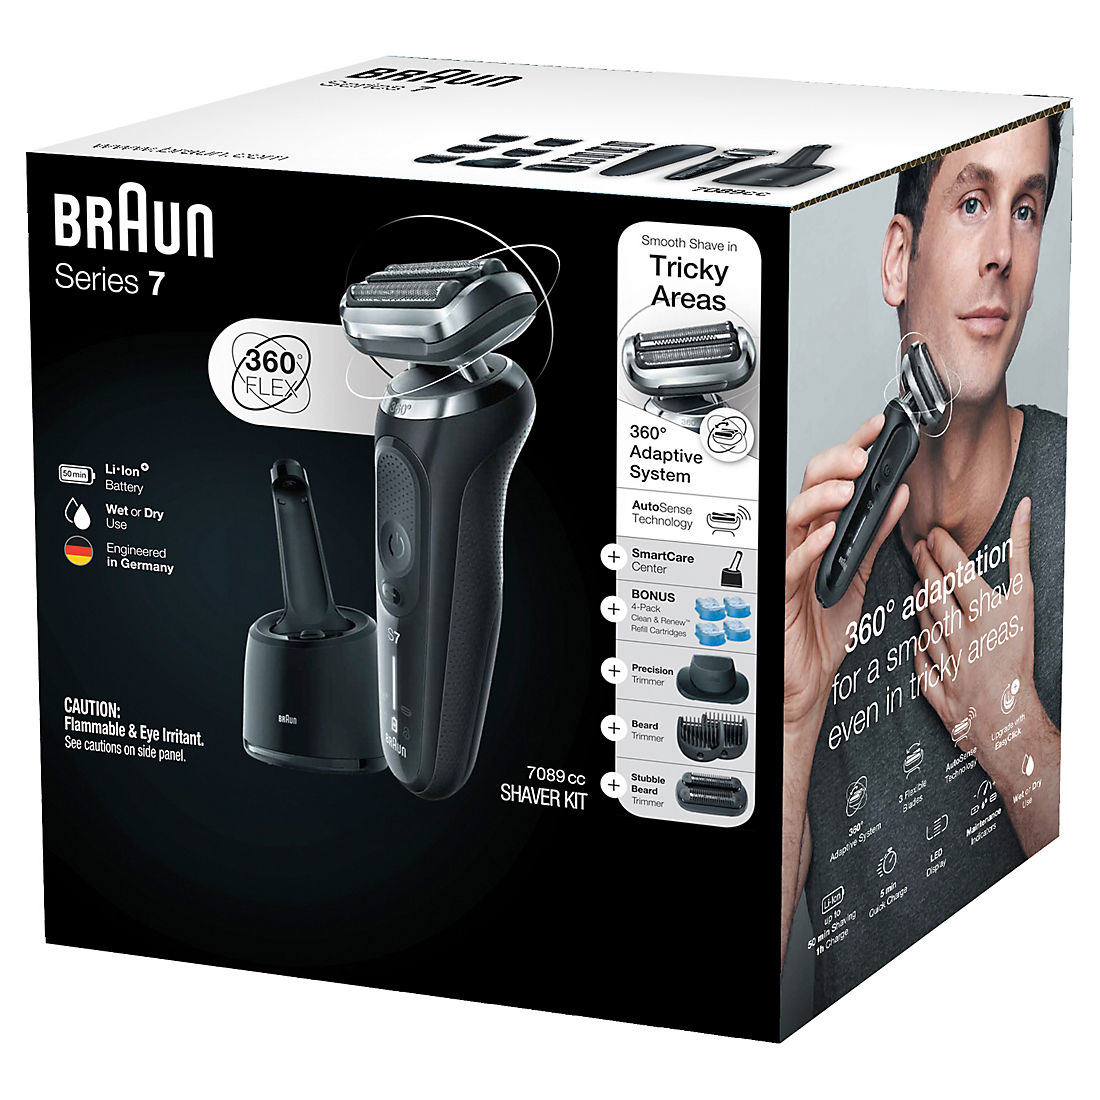 Braun Series 7 7089cc Electric Razor for Men with SmartCare Center,  Refills, Precision, Beard and Stubble Trimmers